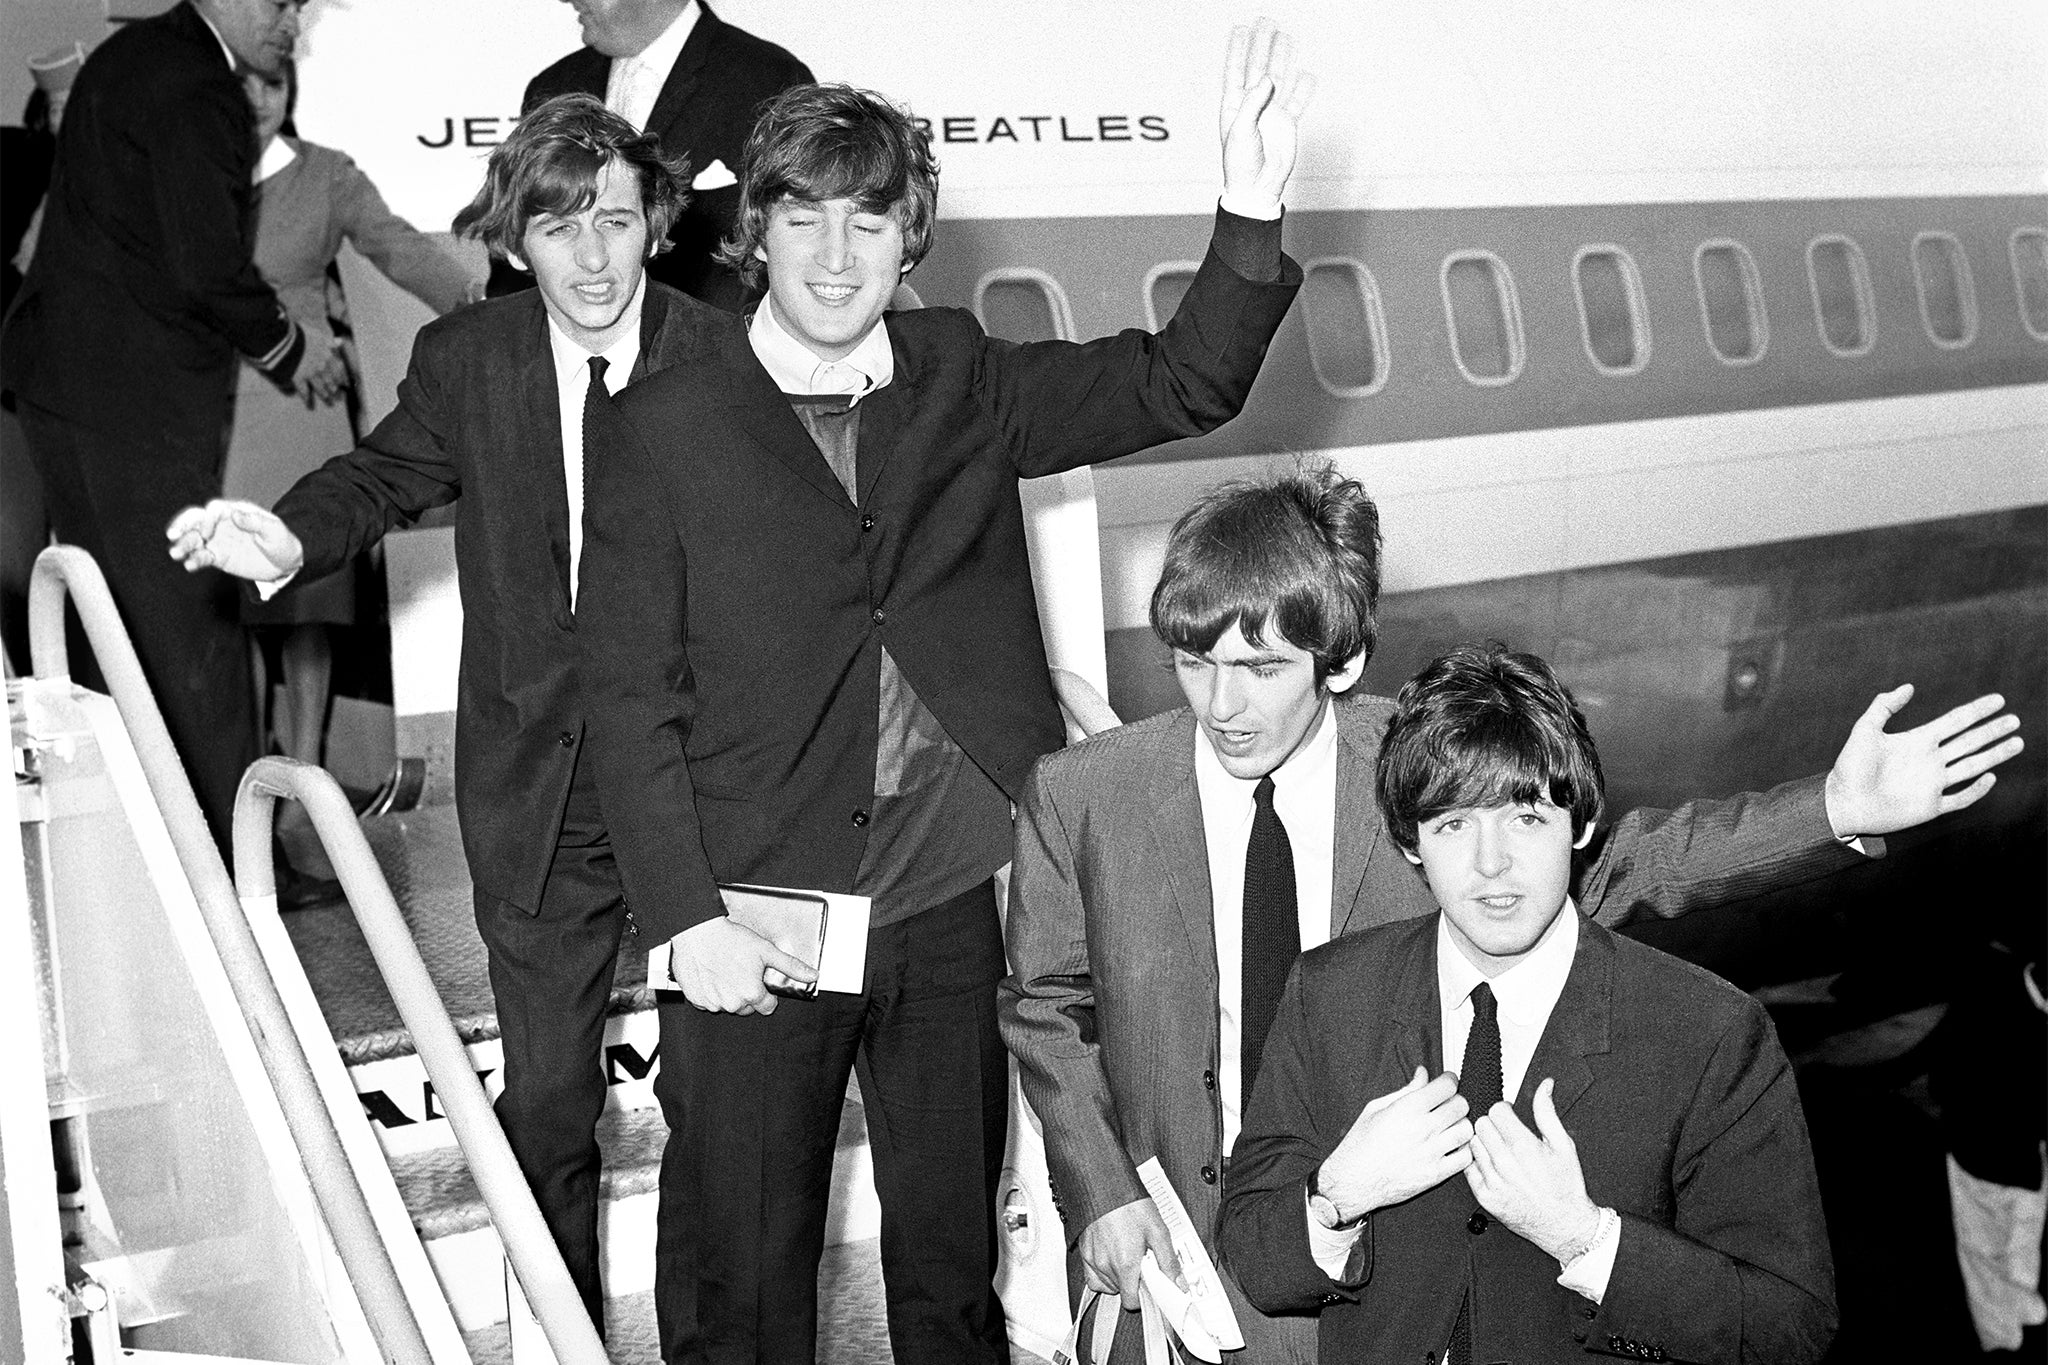 Crazed girls, loose bladders, and JFK: How The Beatles defied the